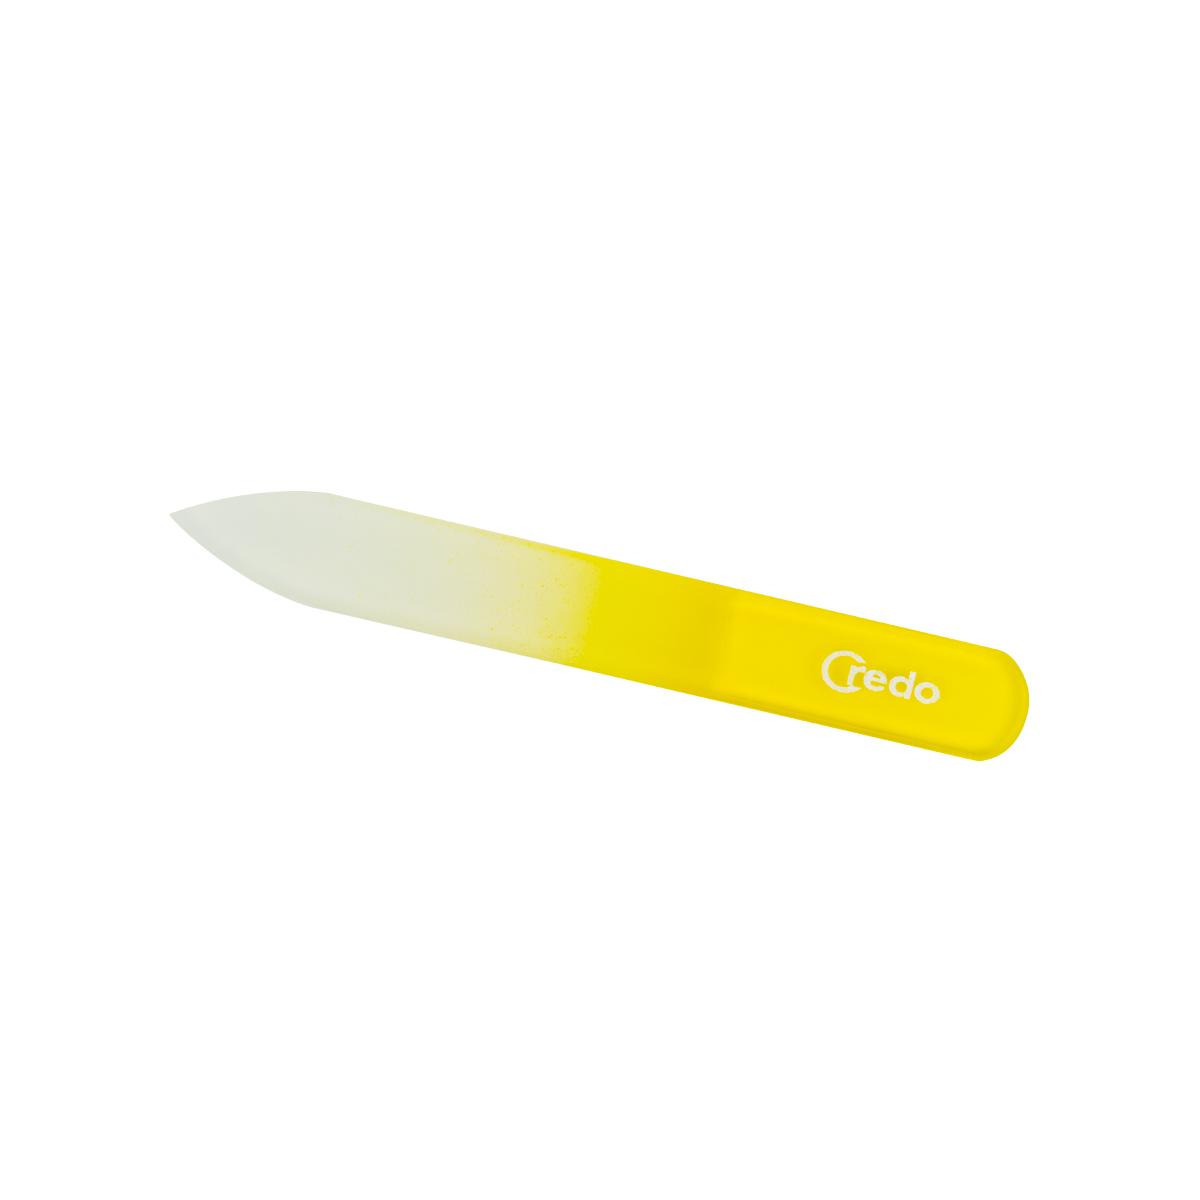 Primary image of Credo Small Yellow 90mm Glass Nail File 90mm Nail File